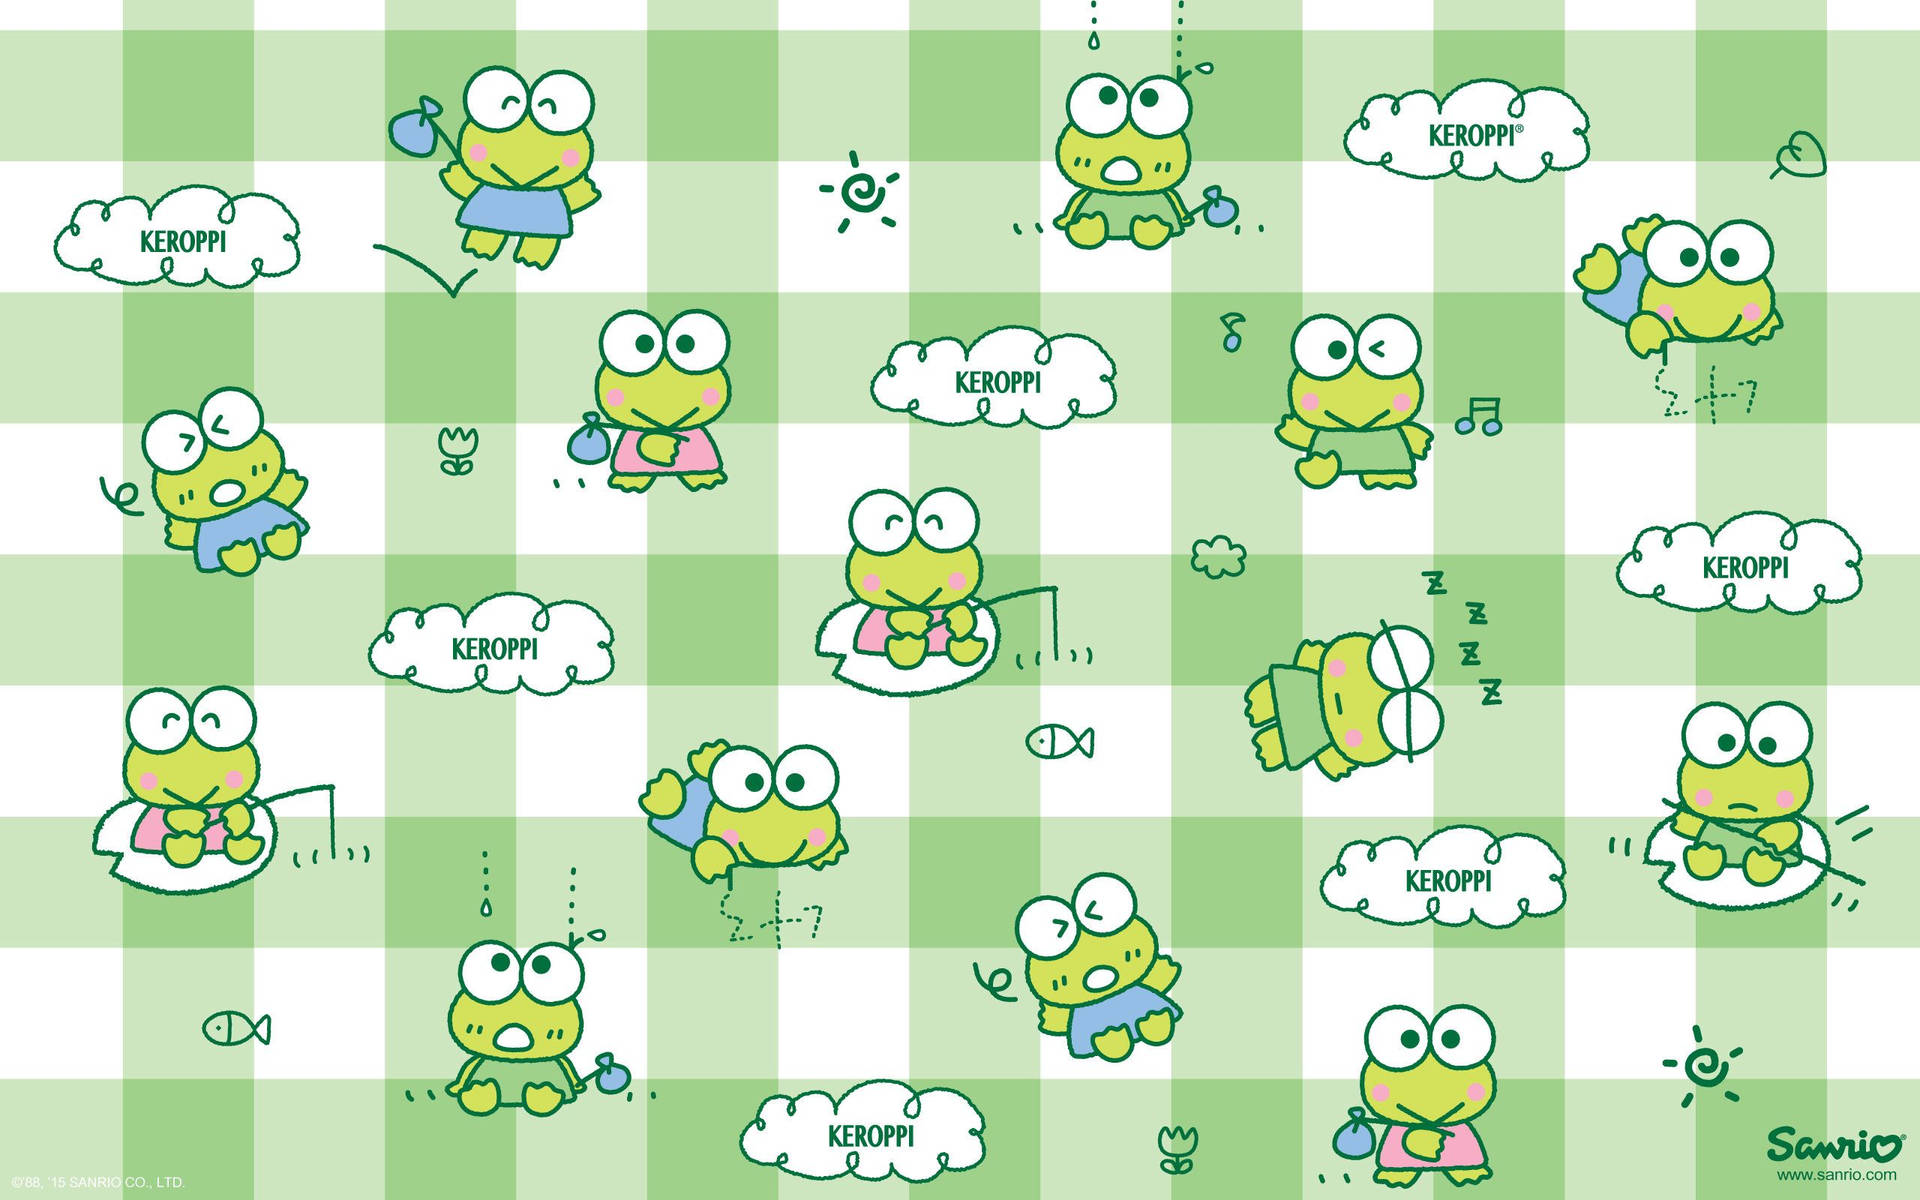 Enjoying An Afternoon Of Relaxation With Keroppi. Background